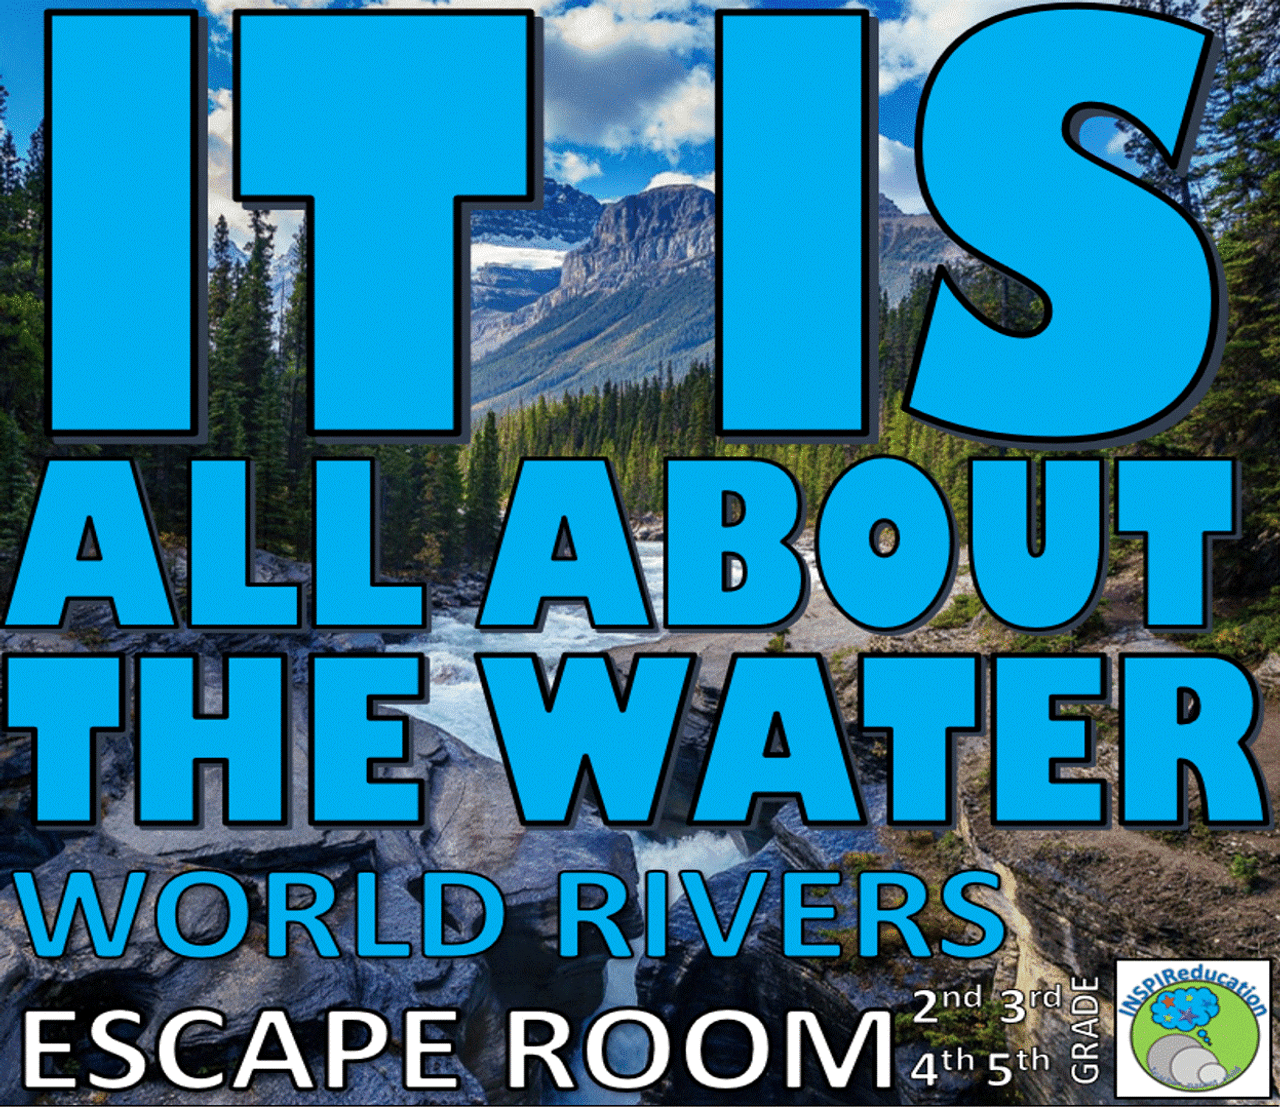 Rivers,　Amped　Up　Challenges,　Activities,　10　Key　Resources,　Answer　ESCAPE　World　ROOM:　Geography　Learning